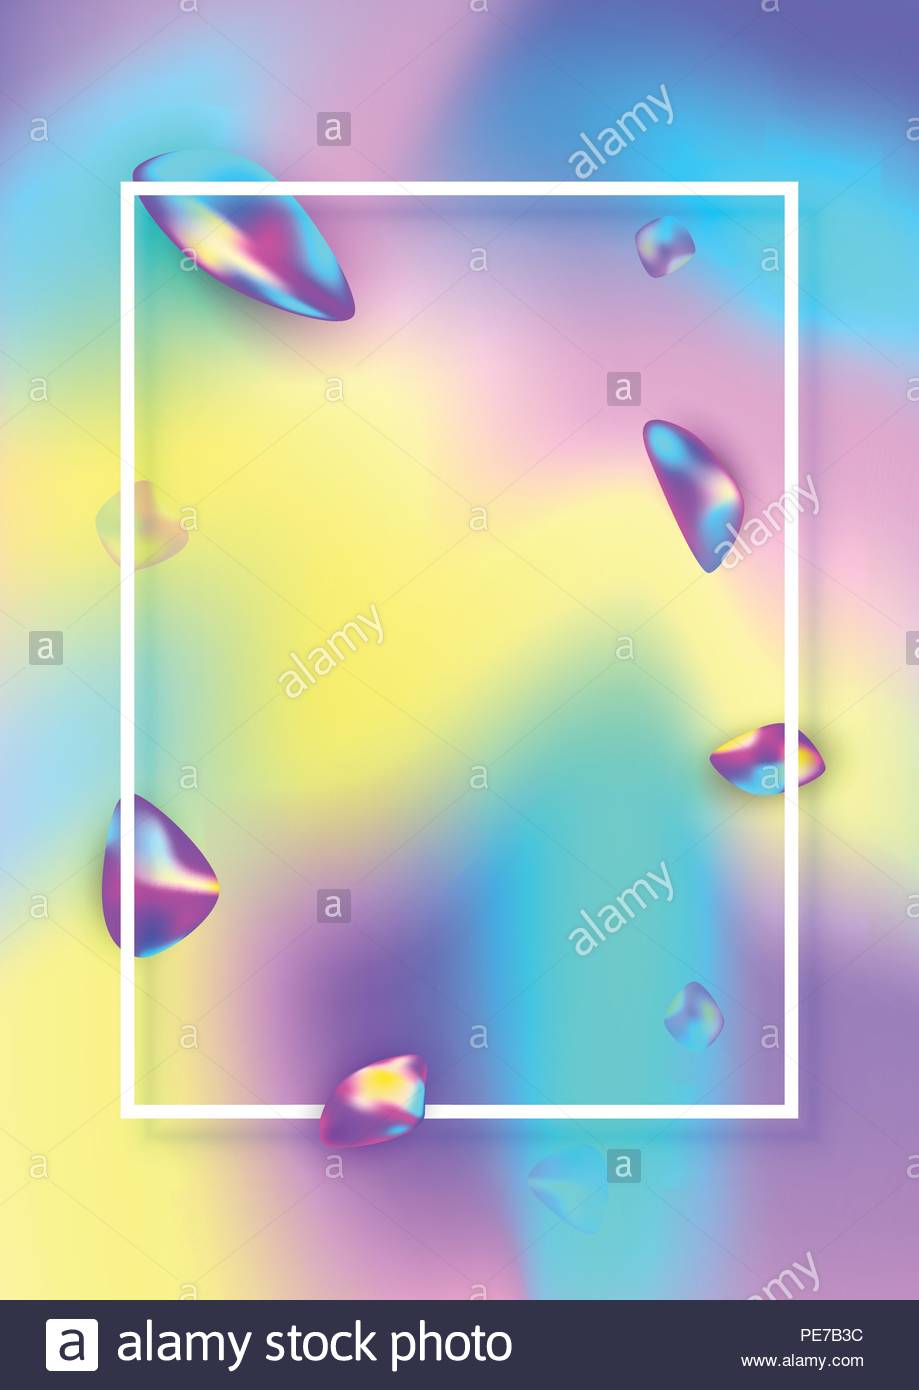 Vertical Cover For Graphic Design Background With Holographic